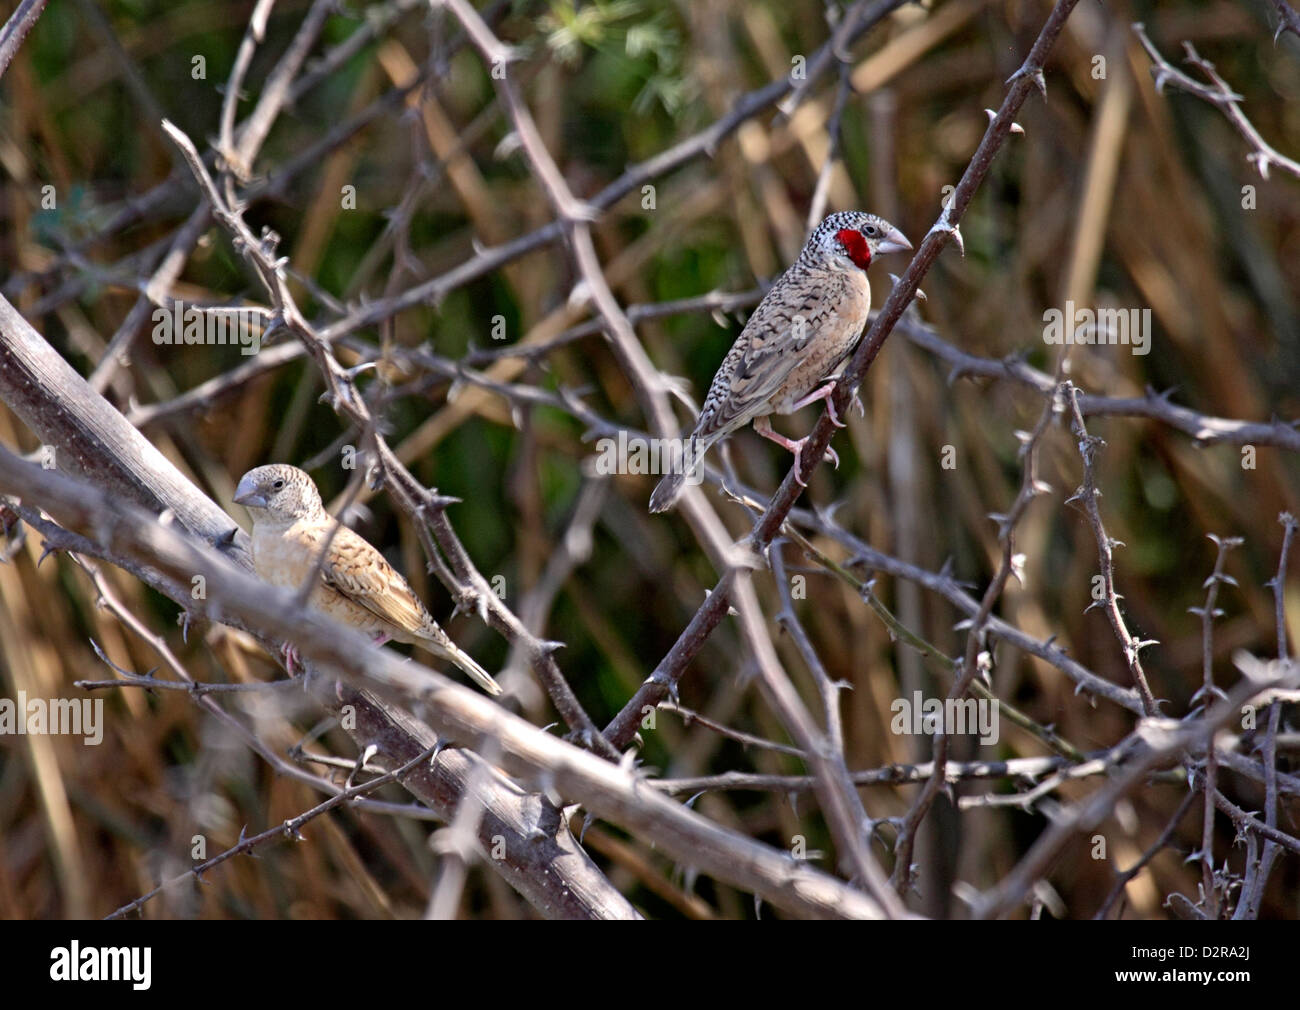 Cut-throat finch pair in The Gambia Stock Photo